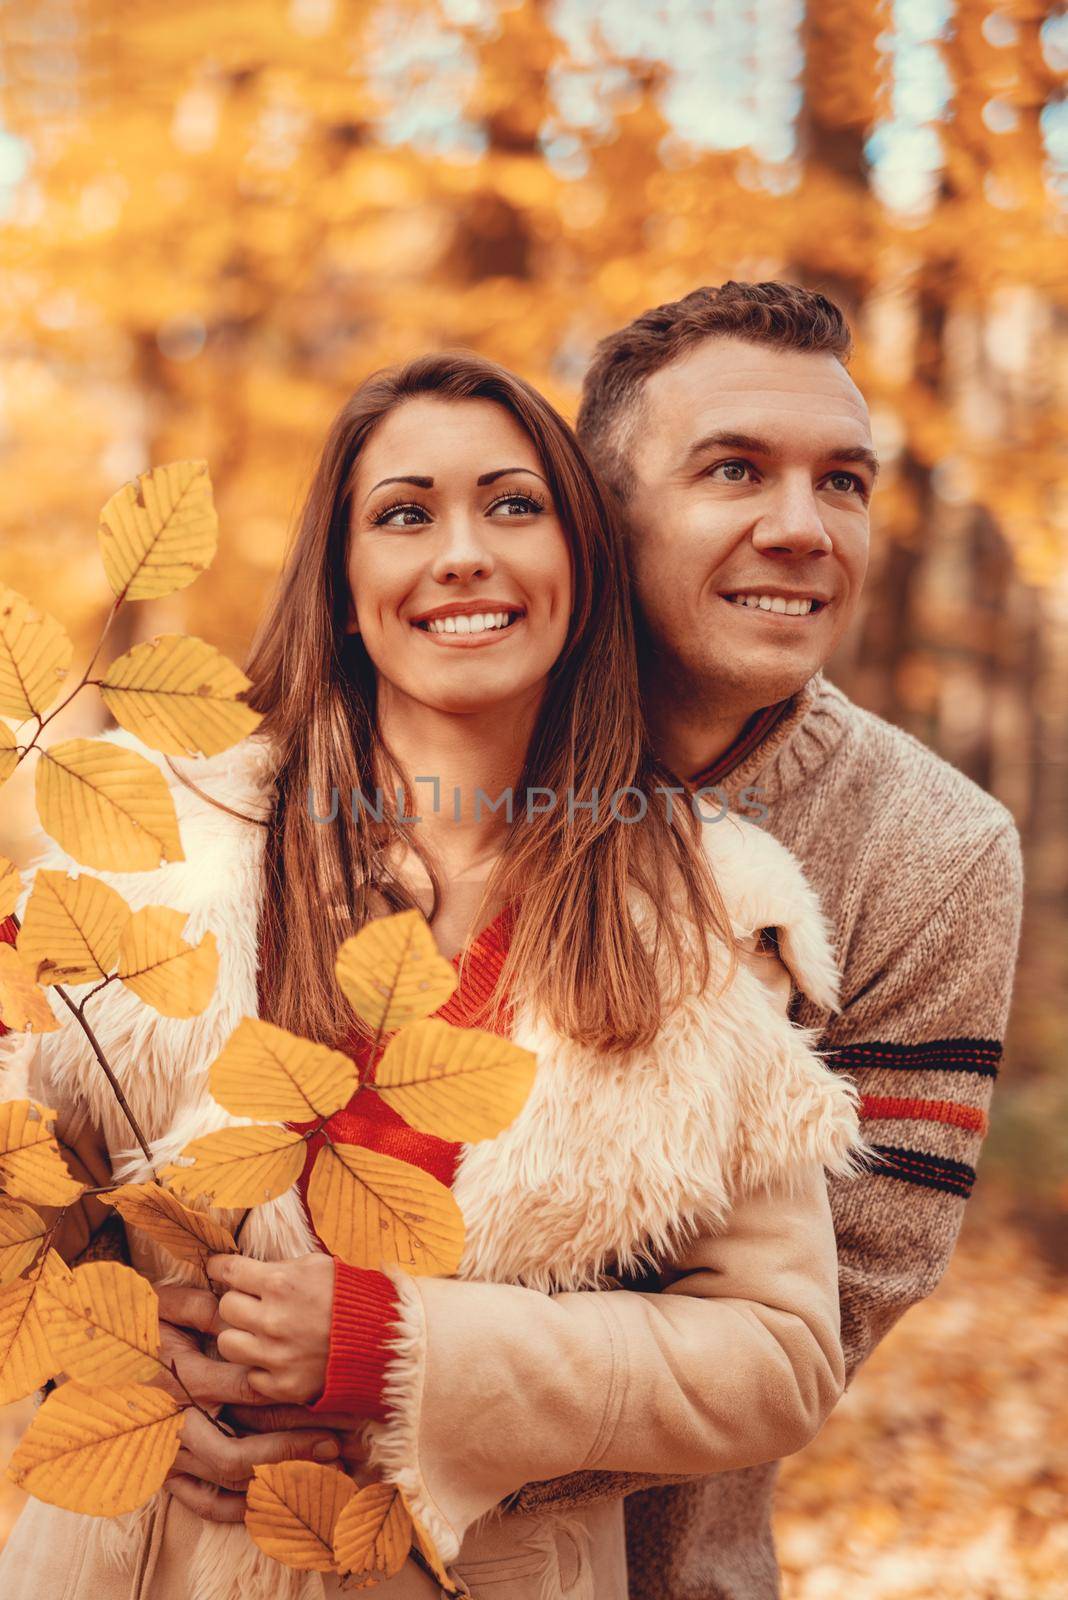 Beautiful smiling couple enjoying in sunny forest in autumn colors.